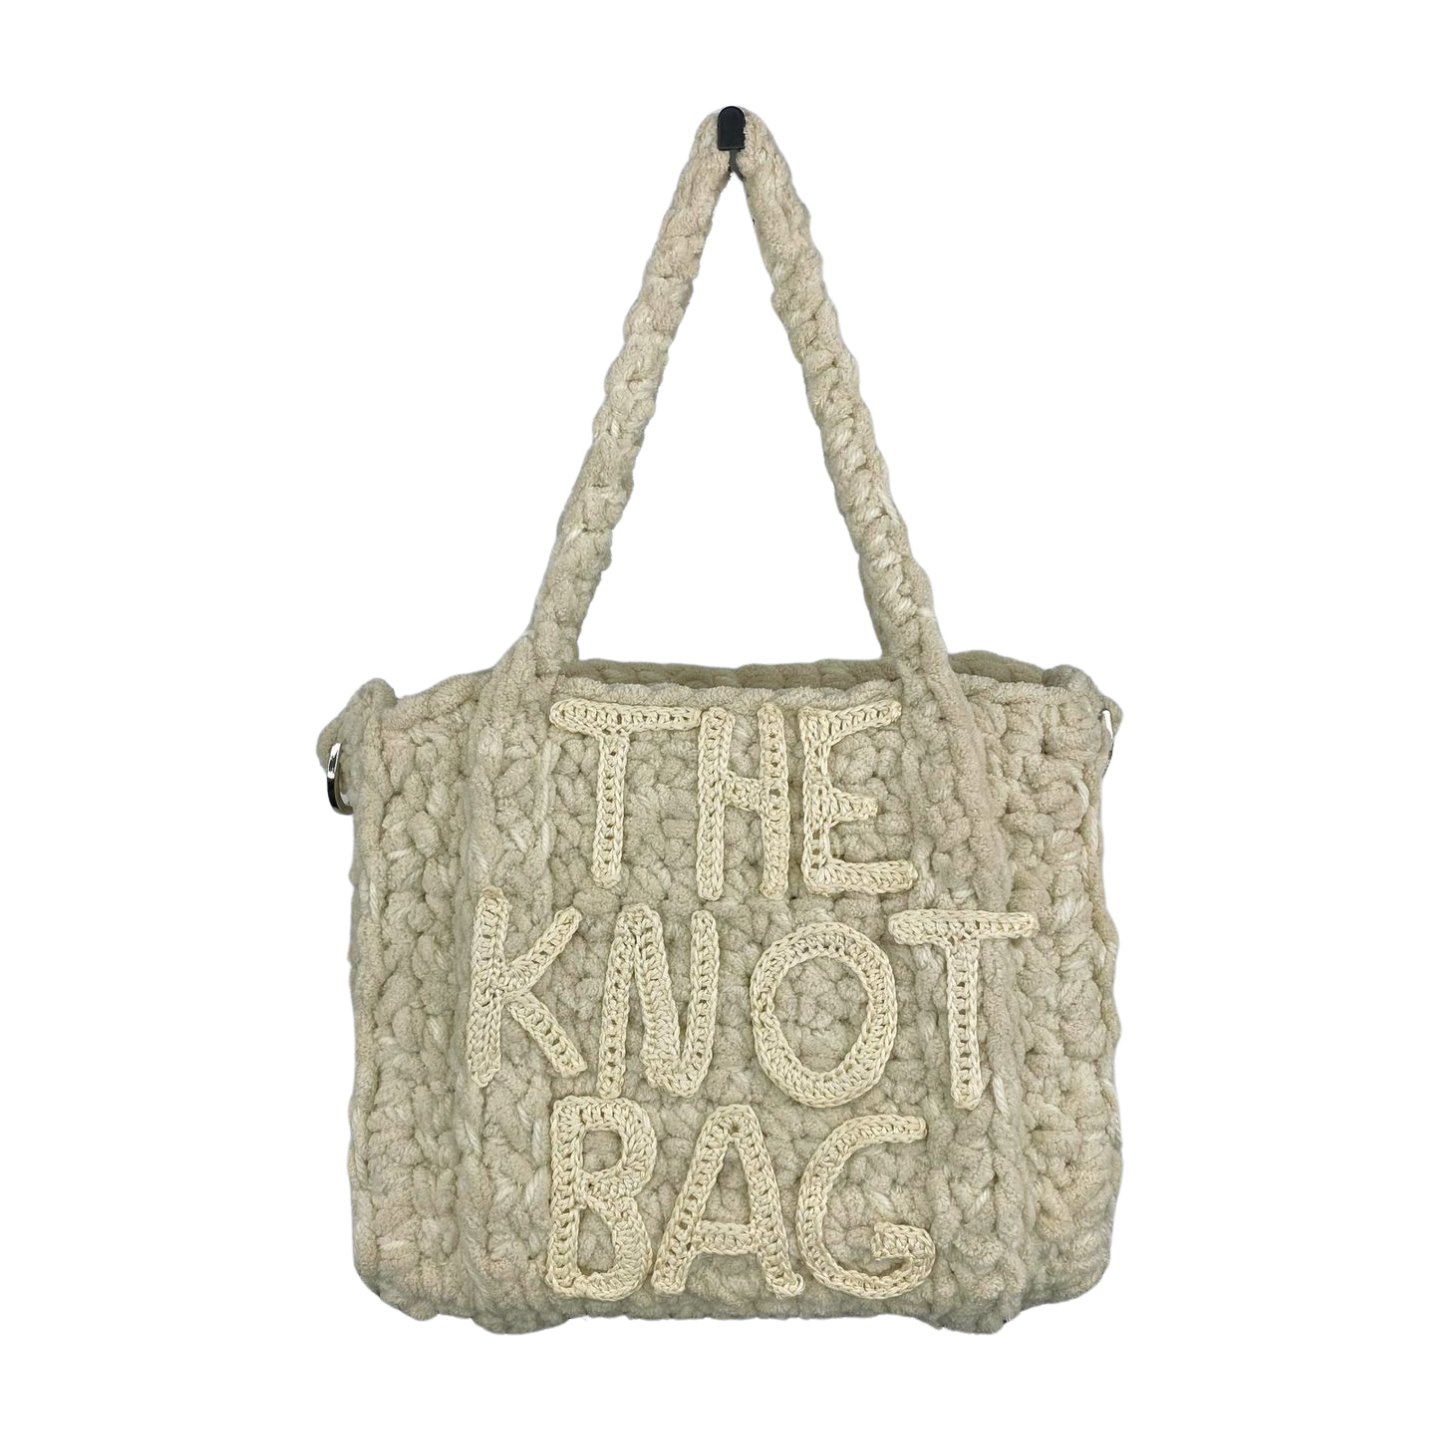 The Knot Bag - S